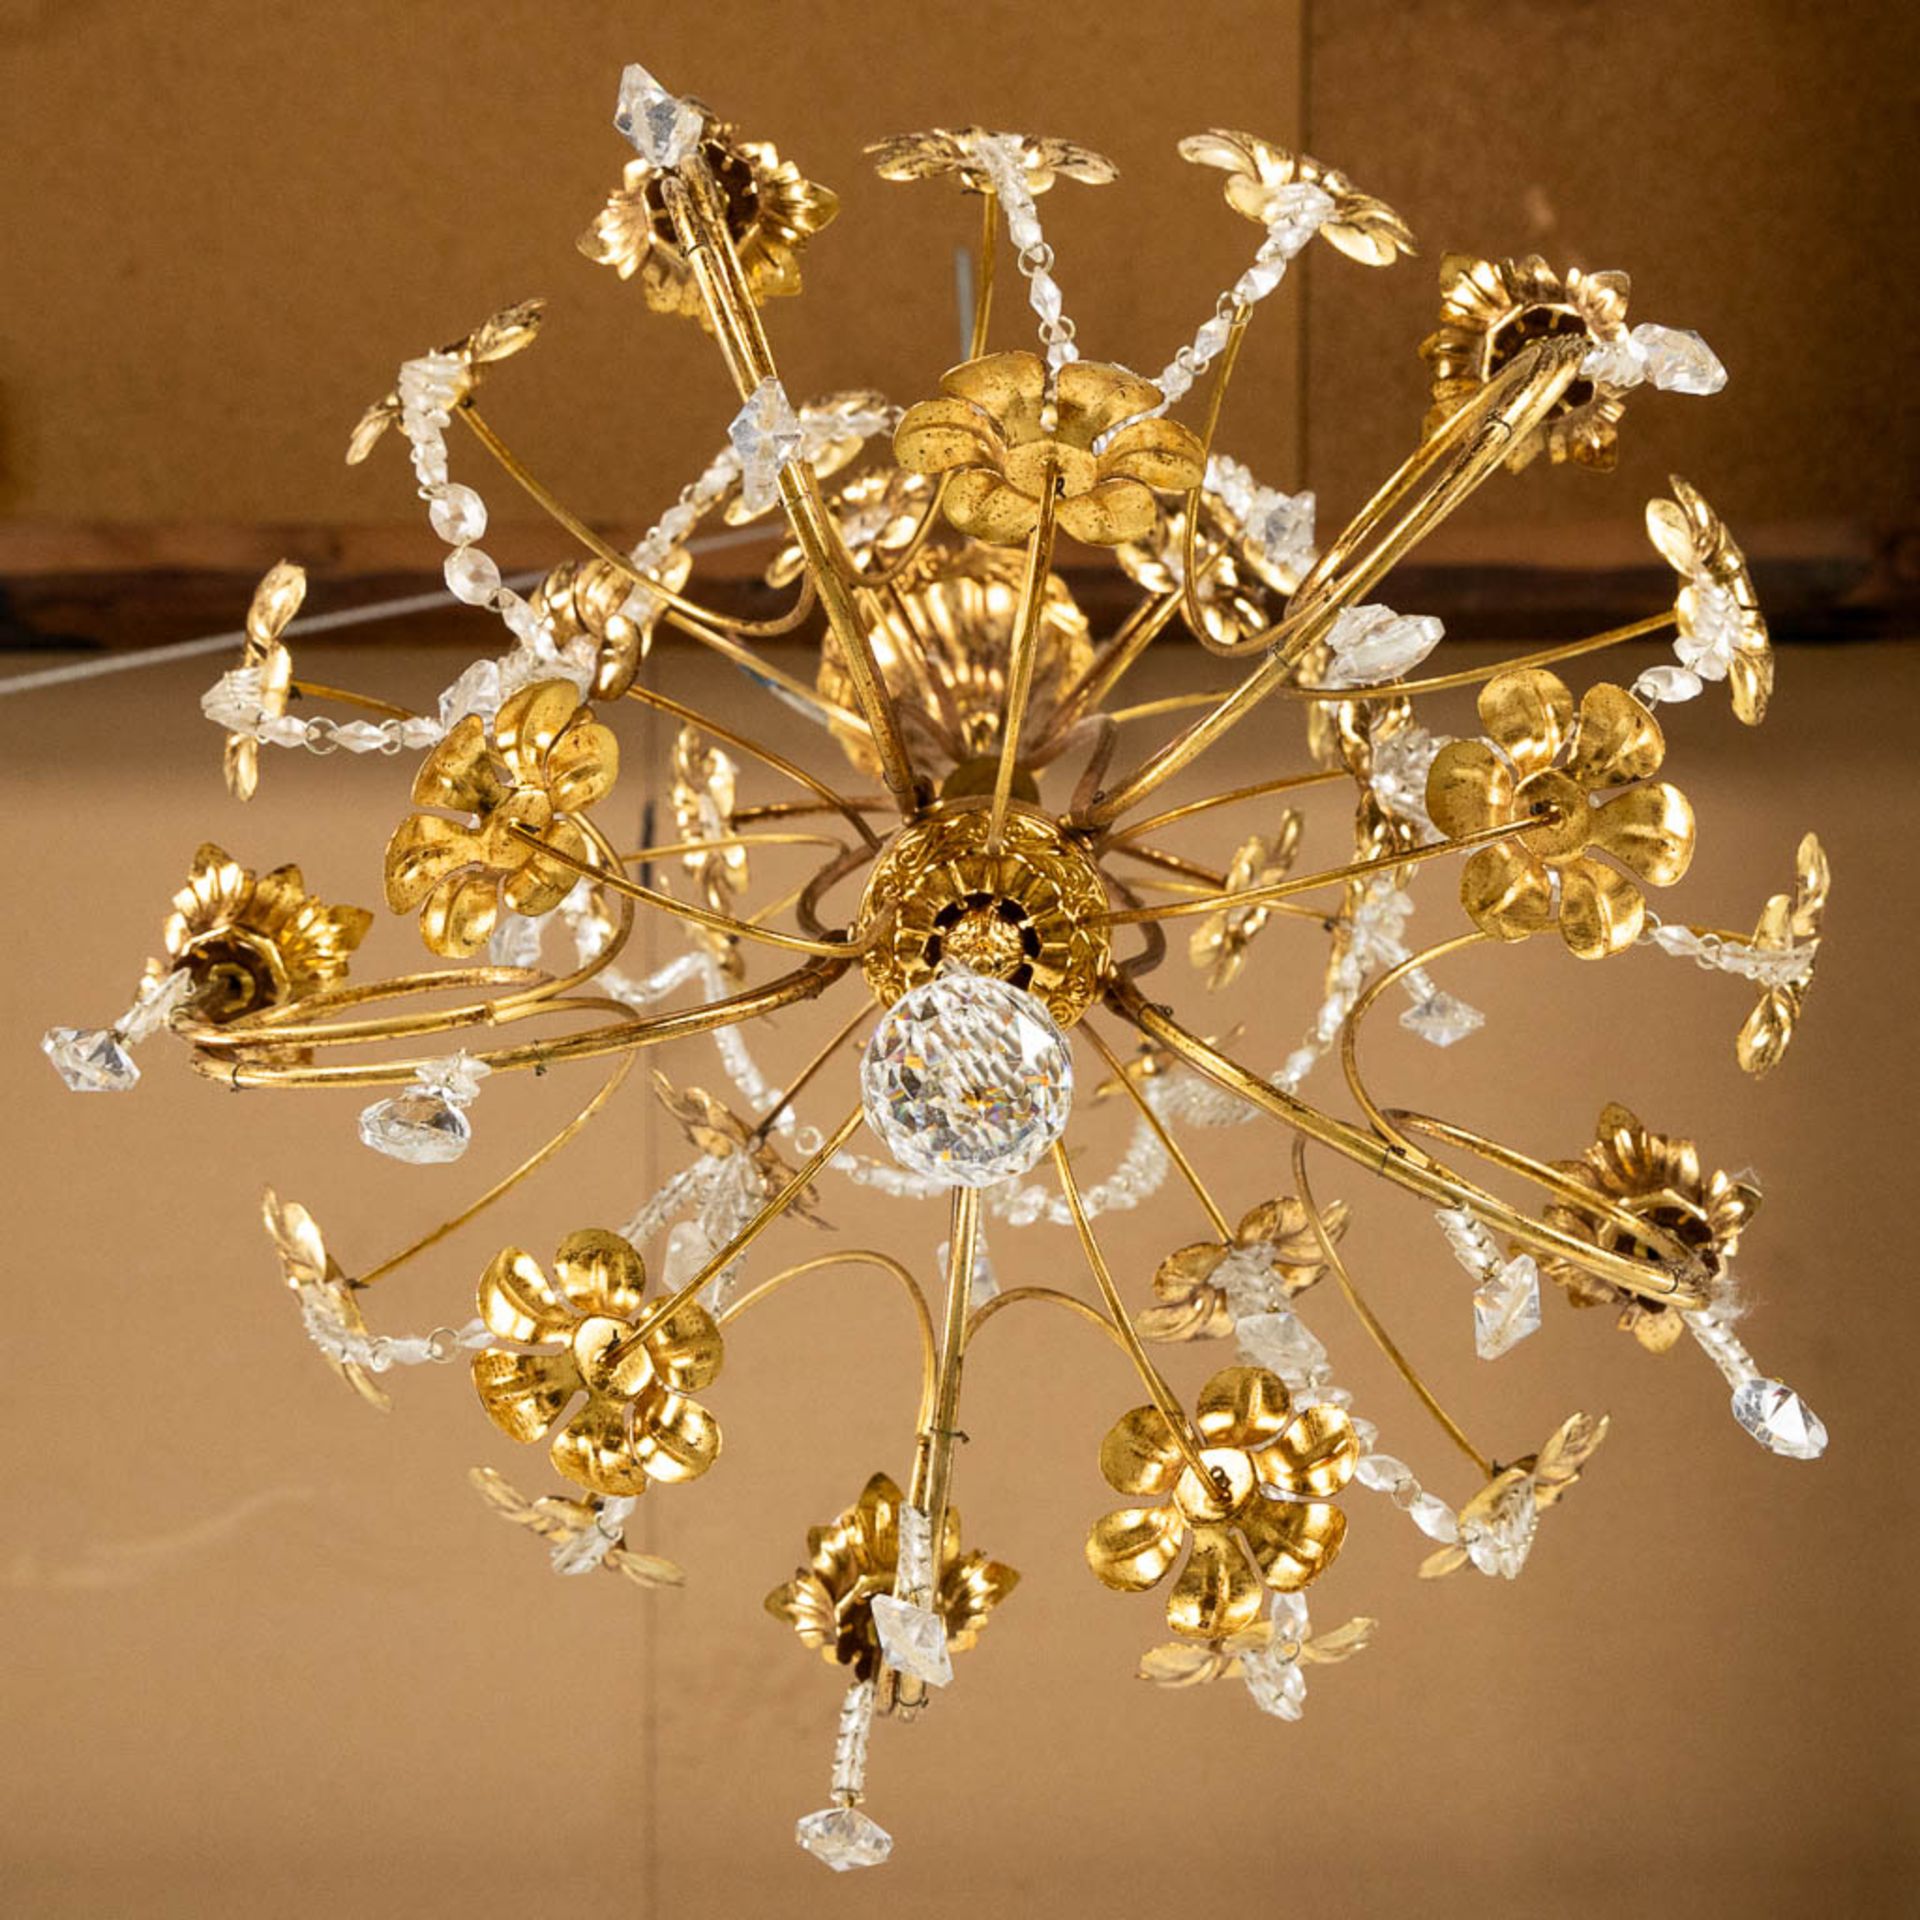 A decorative, floral hall lamp. Brass mounted with glass. 20th C. (H:74 x D:43 cm) - Image 10 of 11